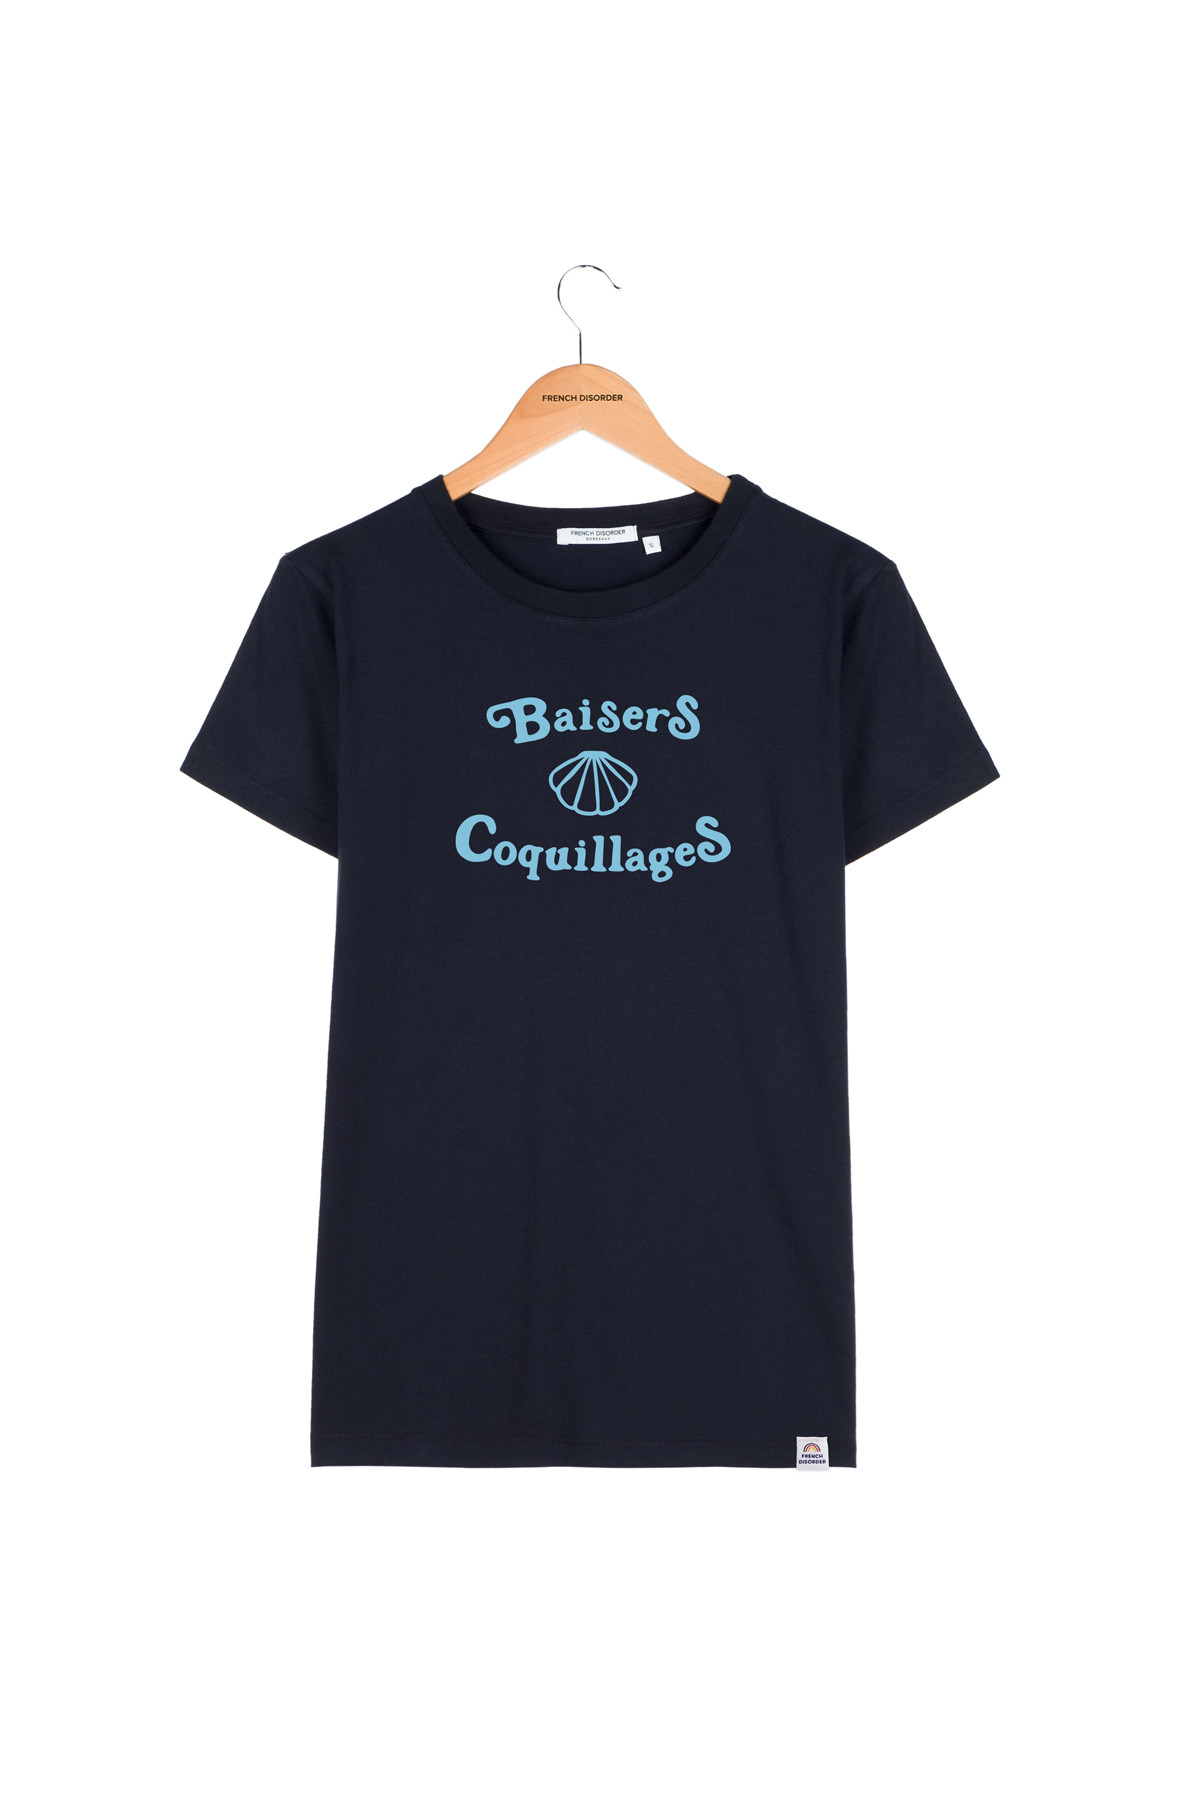 Photo de T-SHIRTS COL ROND Tshirt BAISERS & COQUILLAGES chez French Disorder